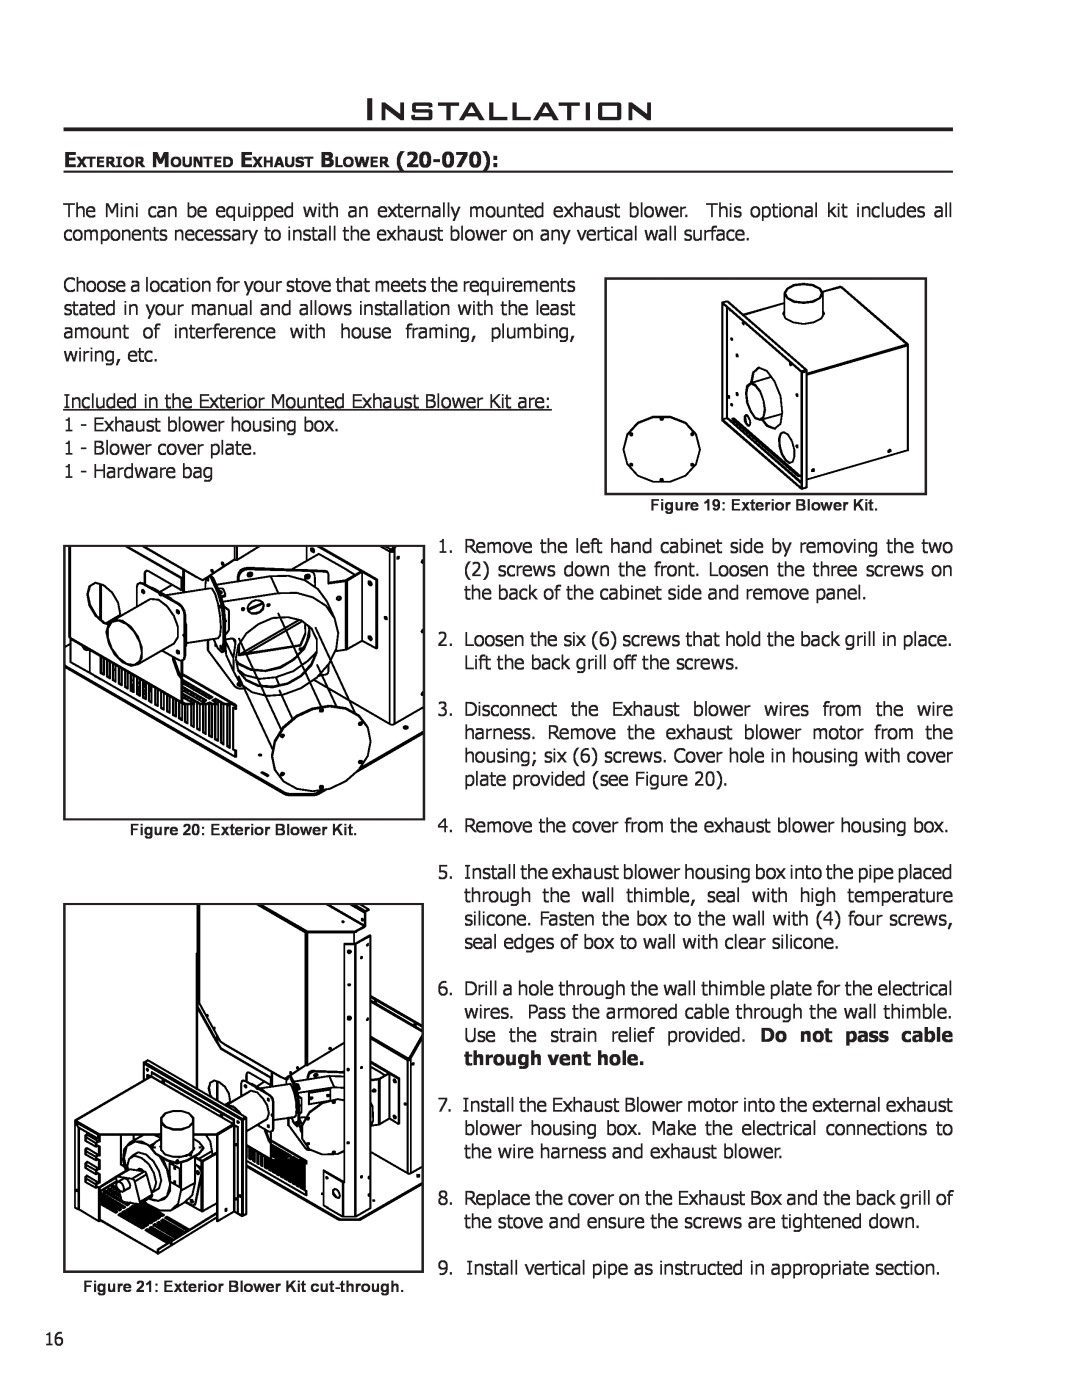 Enviro C-11150 technical manual Installation, Blower cover plate 1 - Hardware bag 